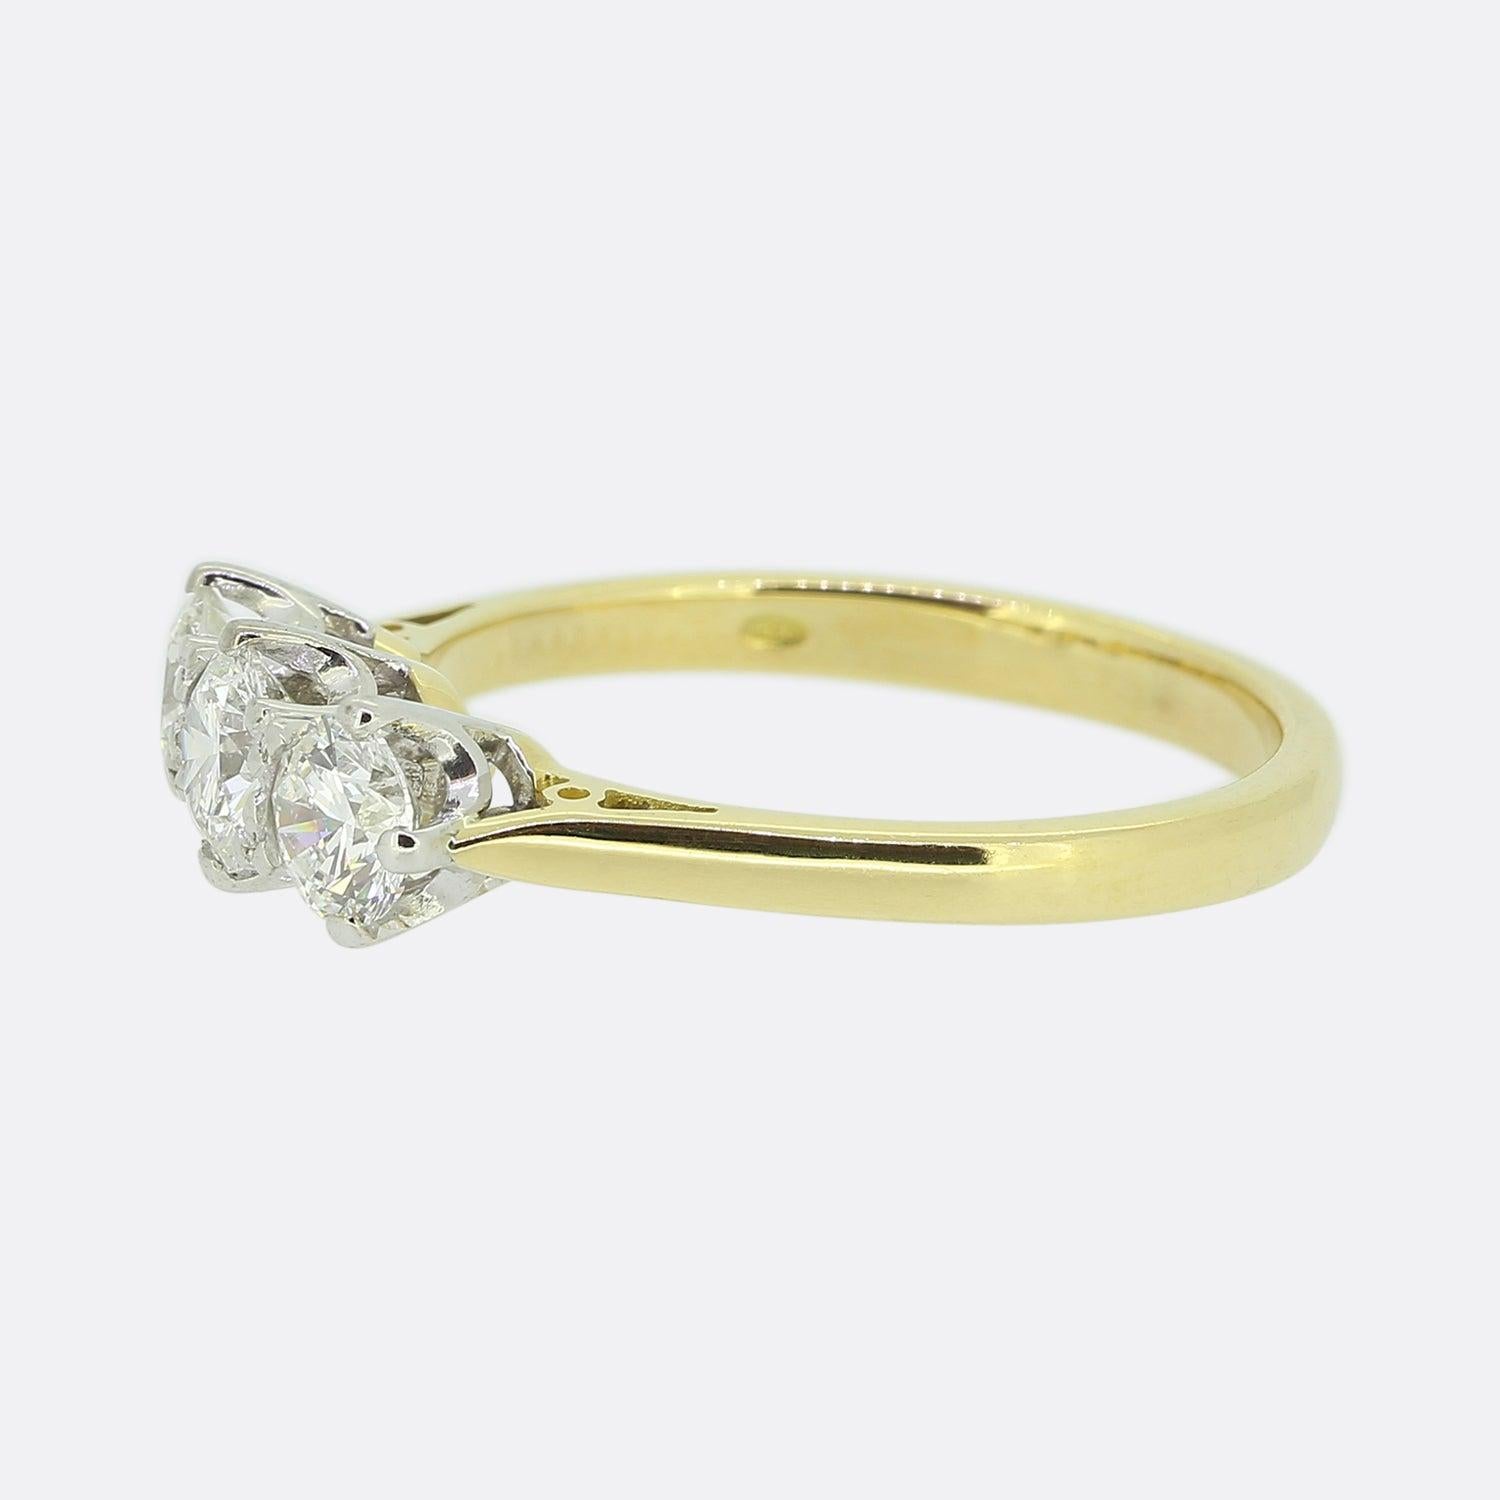 Here we have a wonderful three-stone diamond ring. This contemporary piece showcases a trio of round brilliant cut diamonds with the centre stone being slightly larger than it's two counterparts. Each bright white diamond has been claw set in